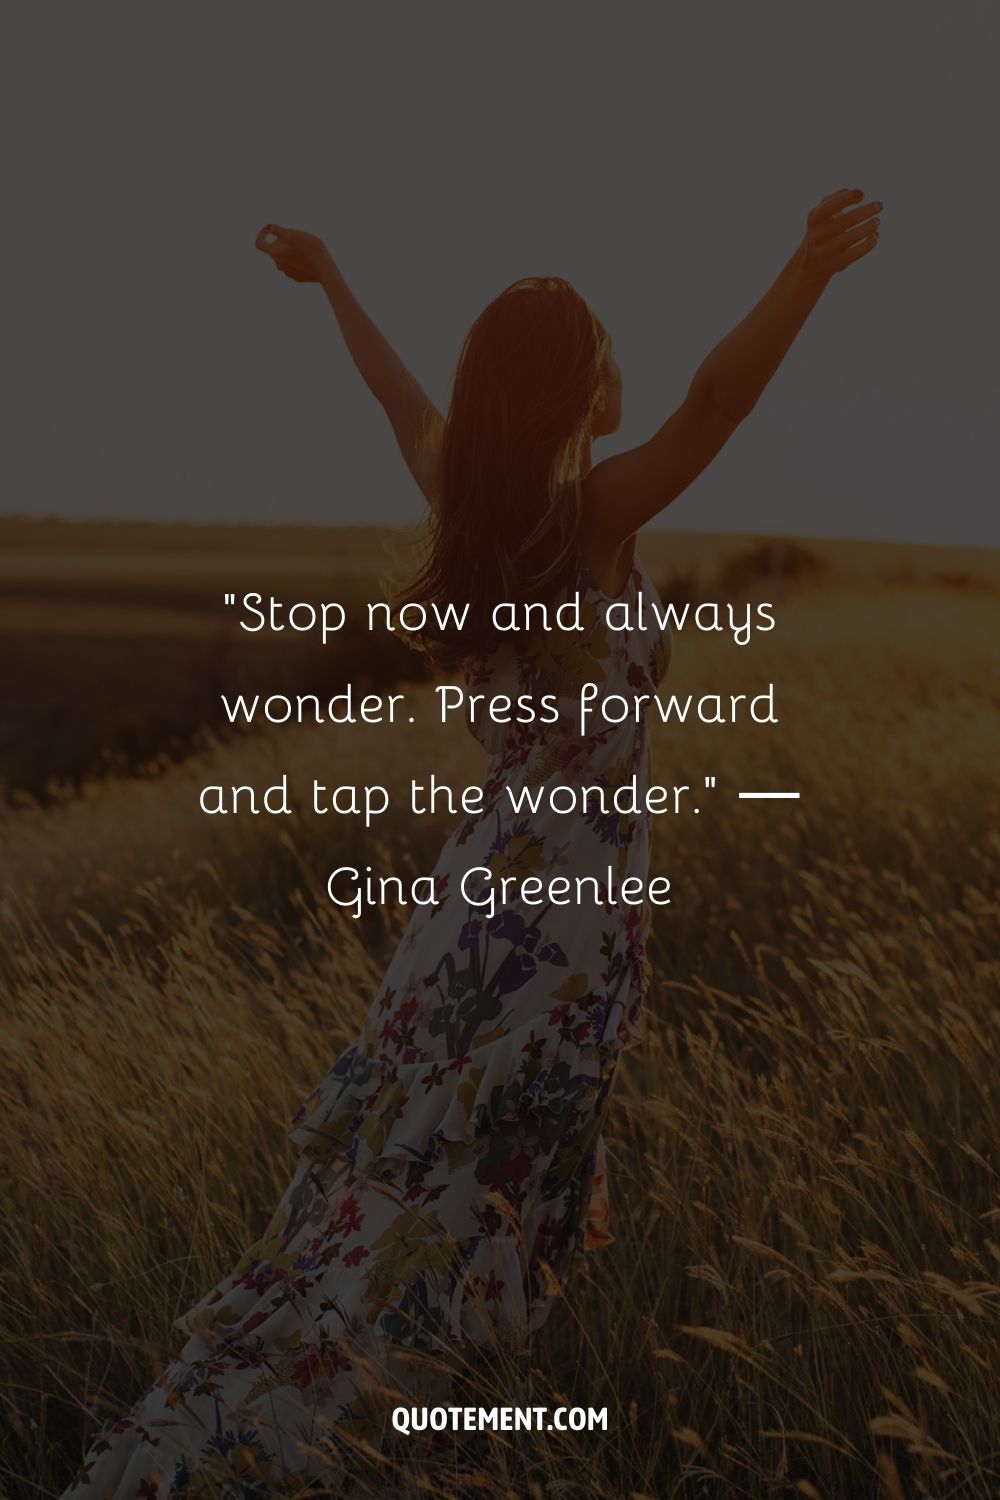 A woman standing in a field with arms raised representing the greatest keep going quote